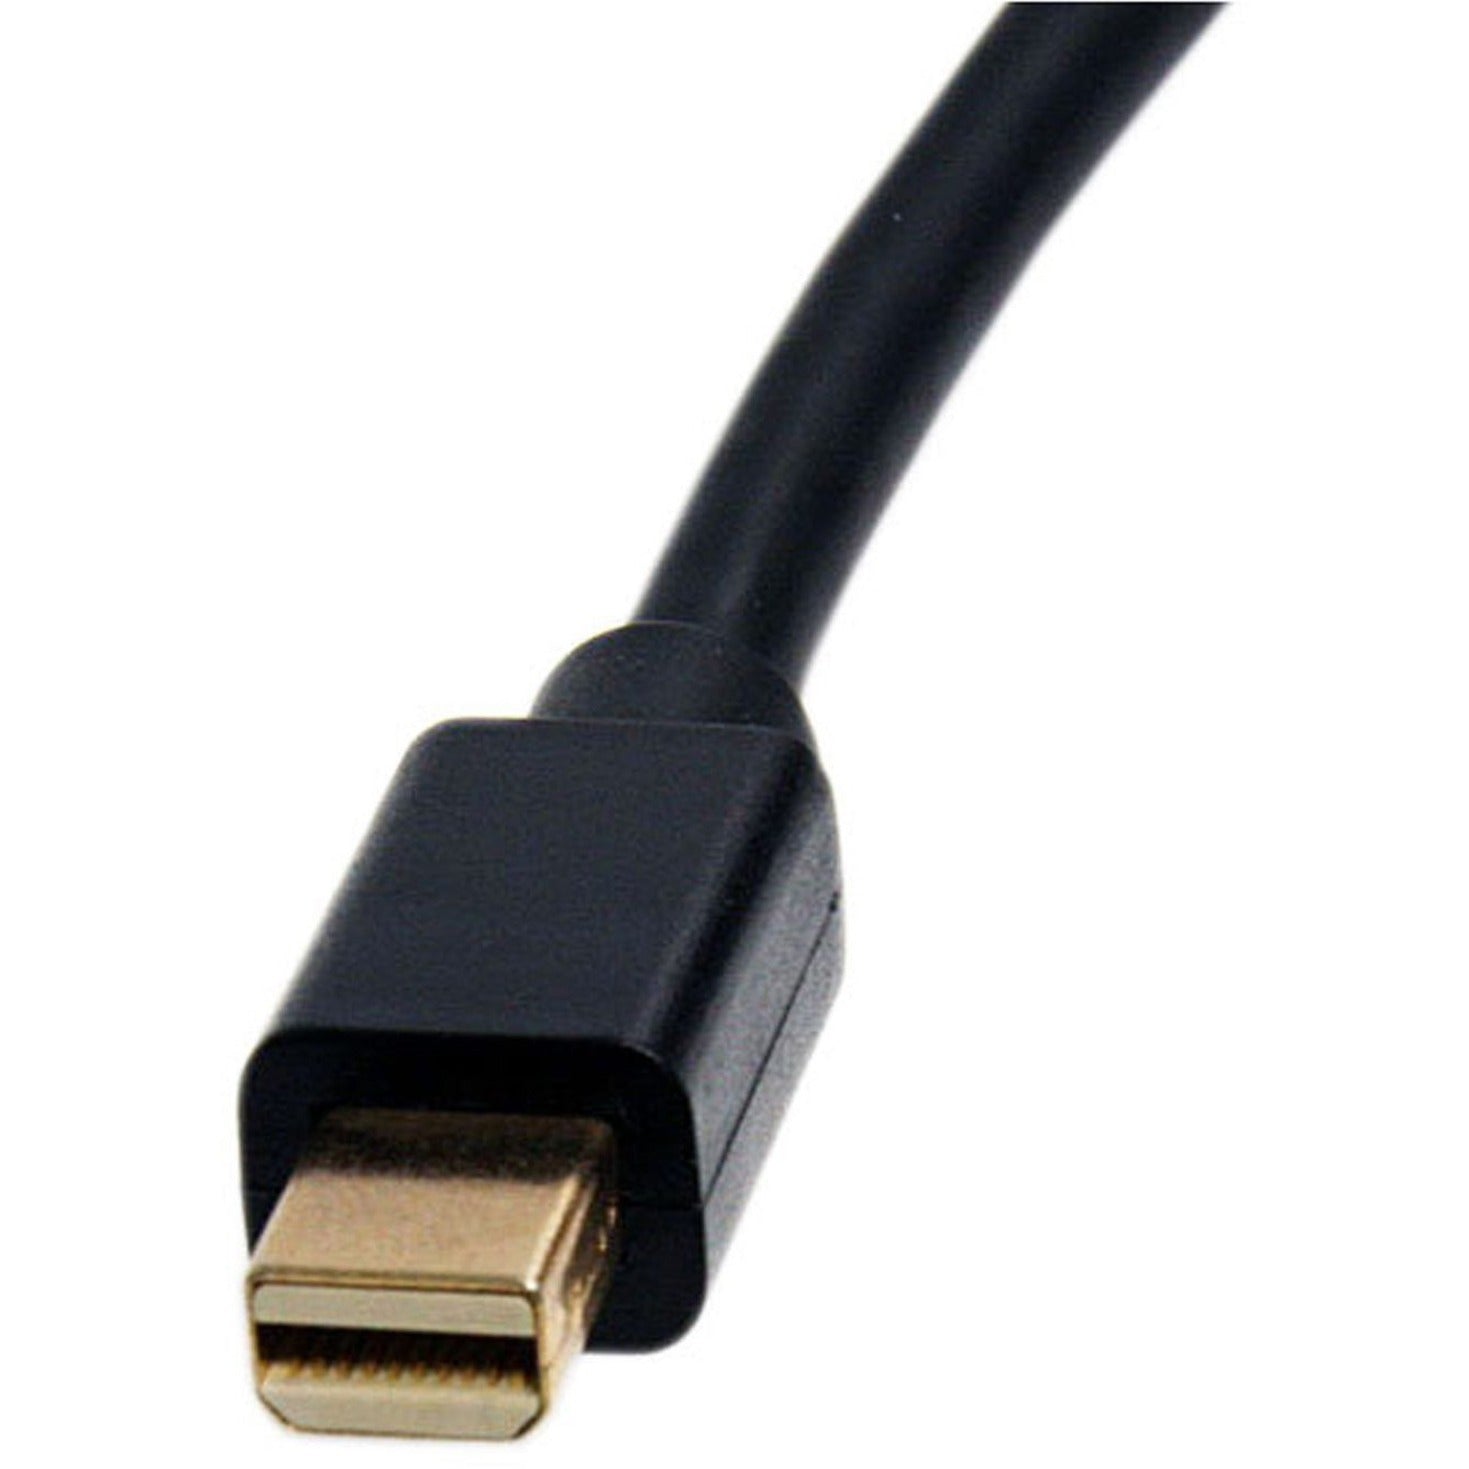 StarTech.com MDP2HDMI Mini DisplayPort to HDMI Video Adapter Converter, Passive, Gold-Plated Connector, 5.10" Cable Length